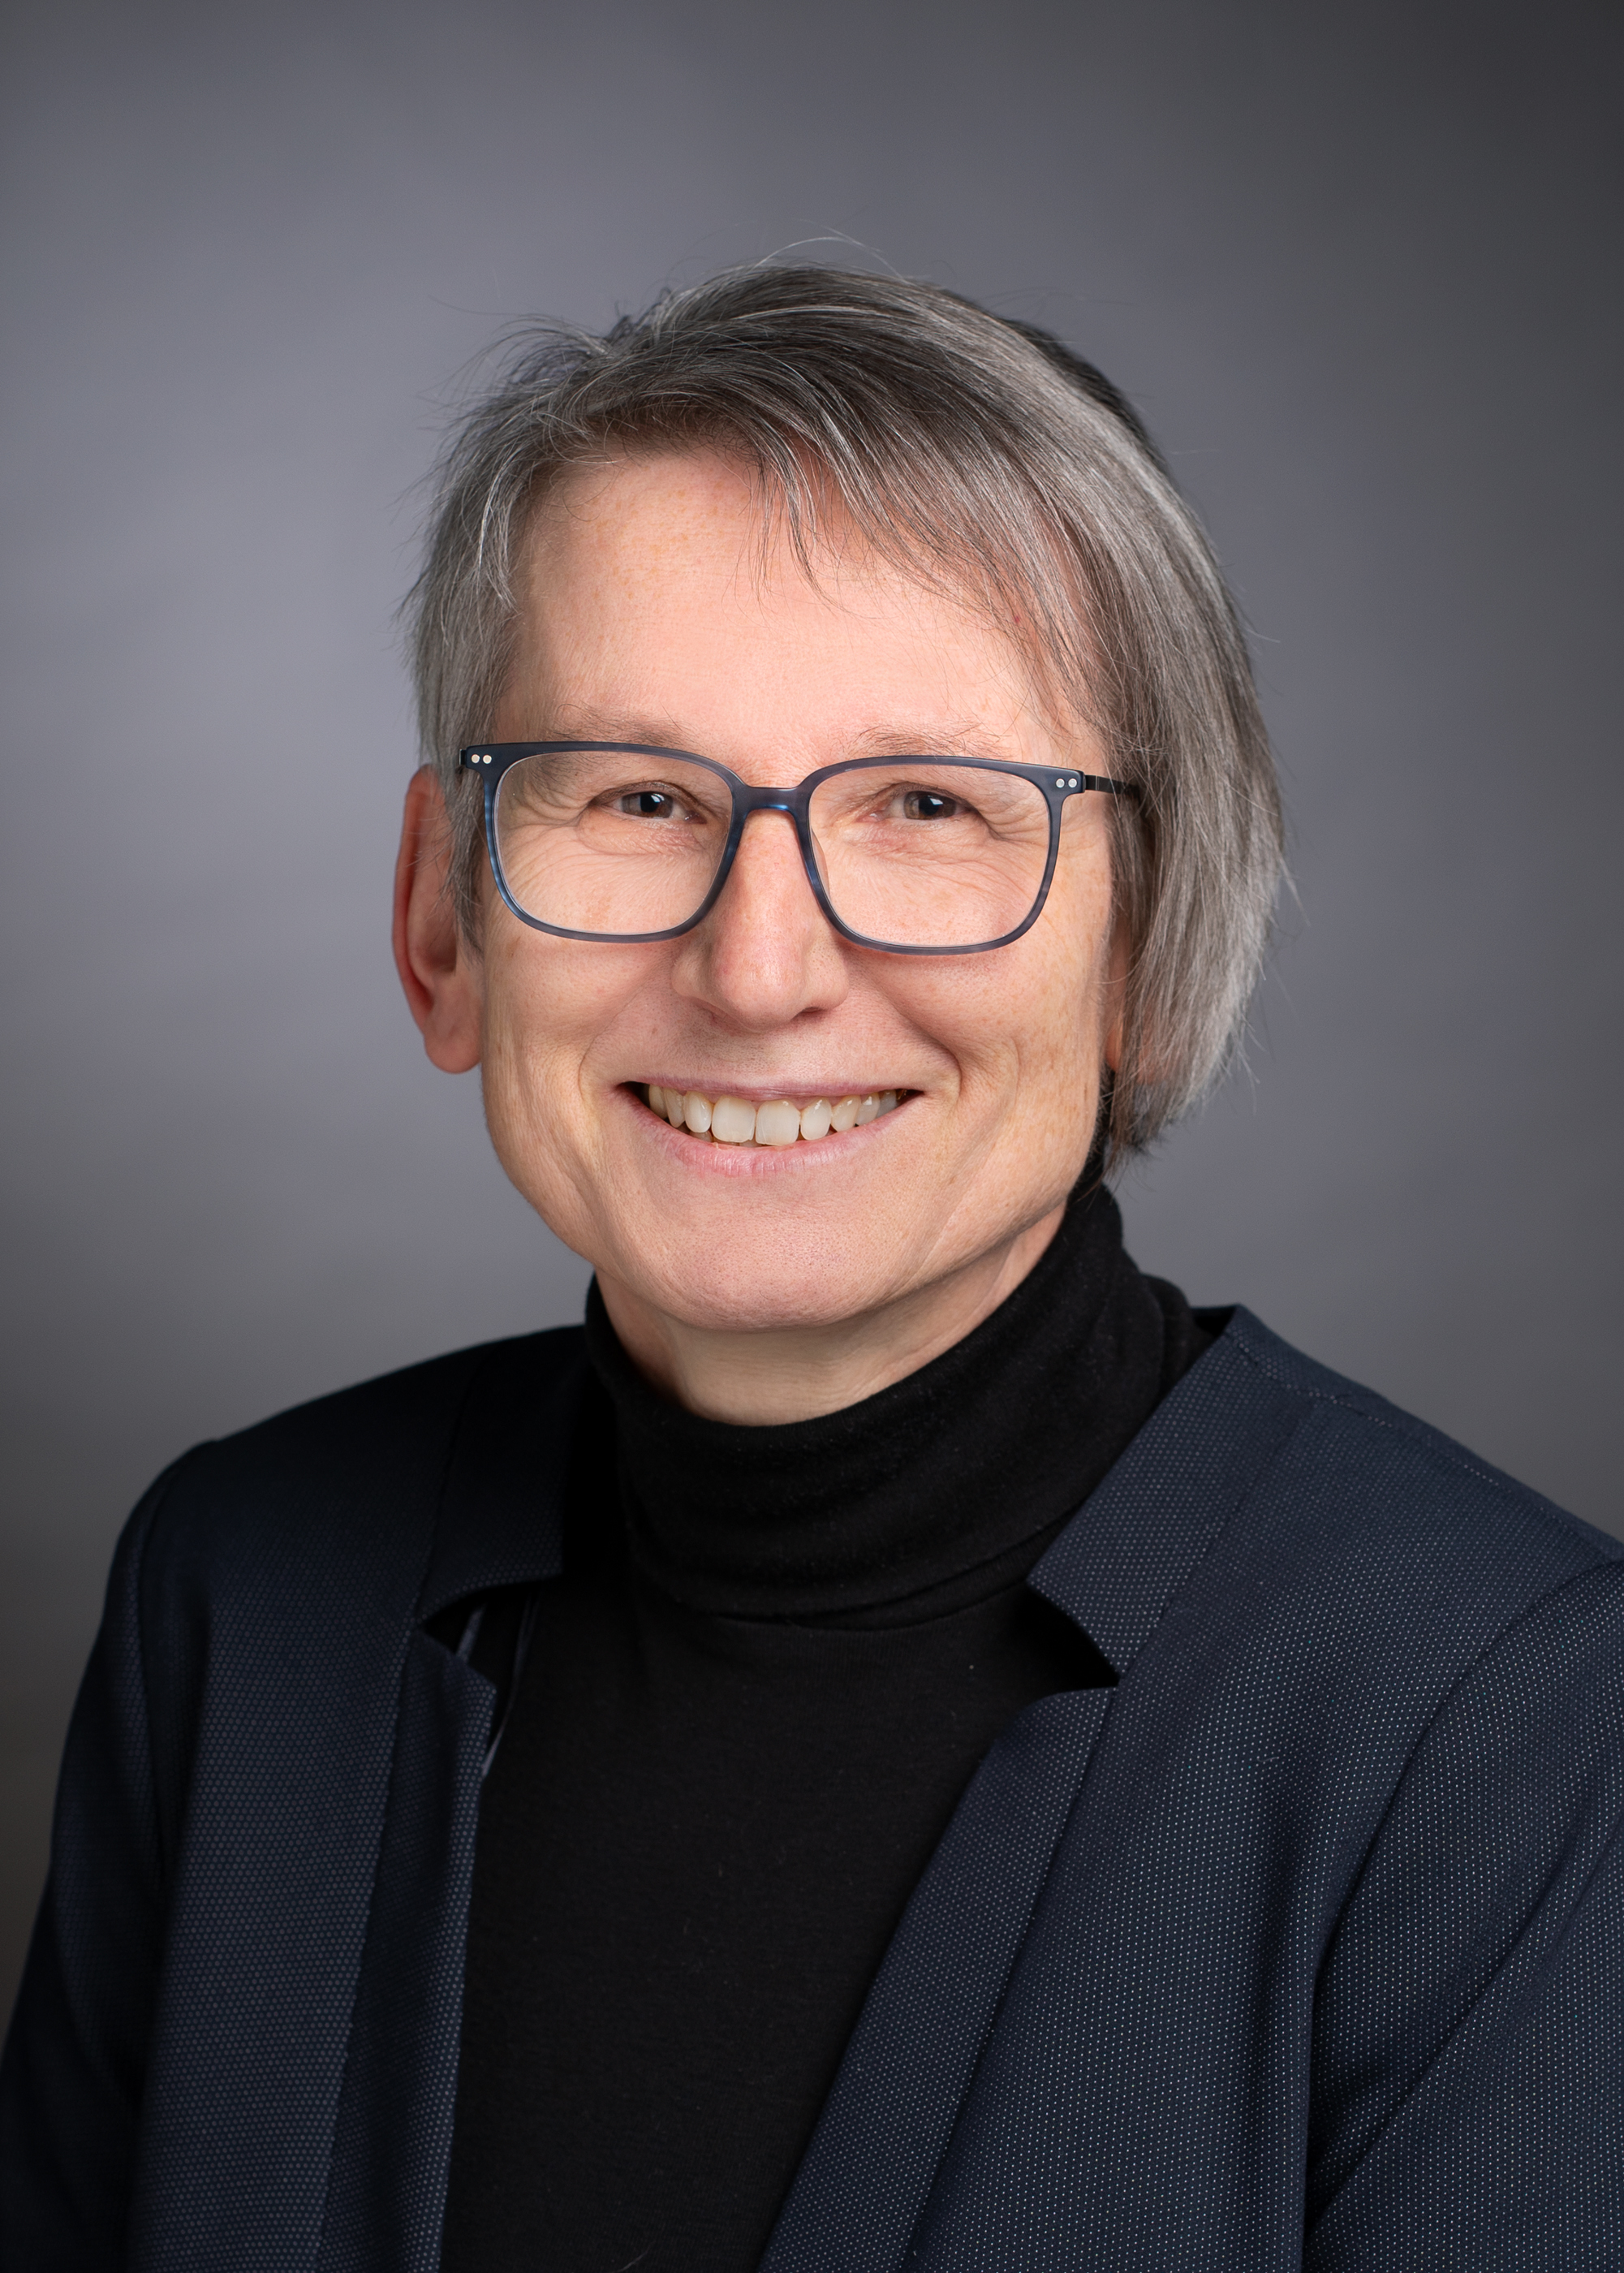  Kathrin Reppel-Knpfle